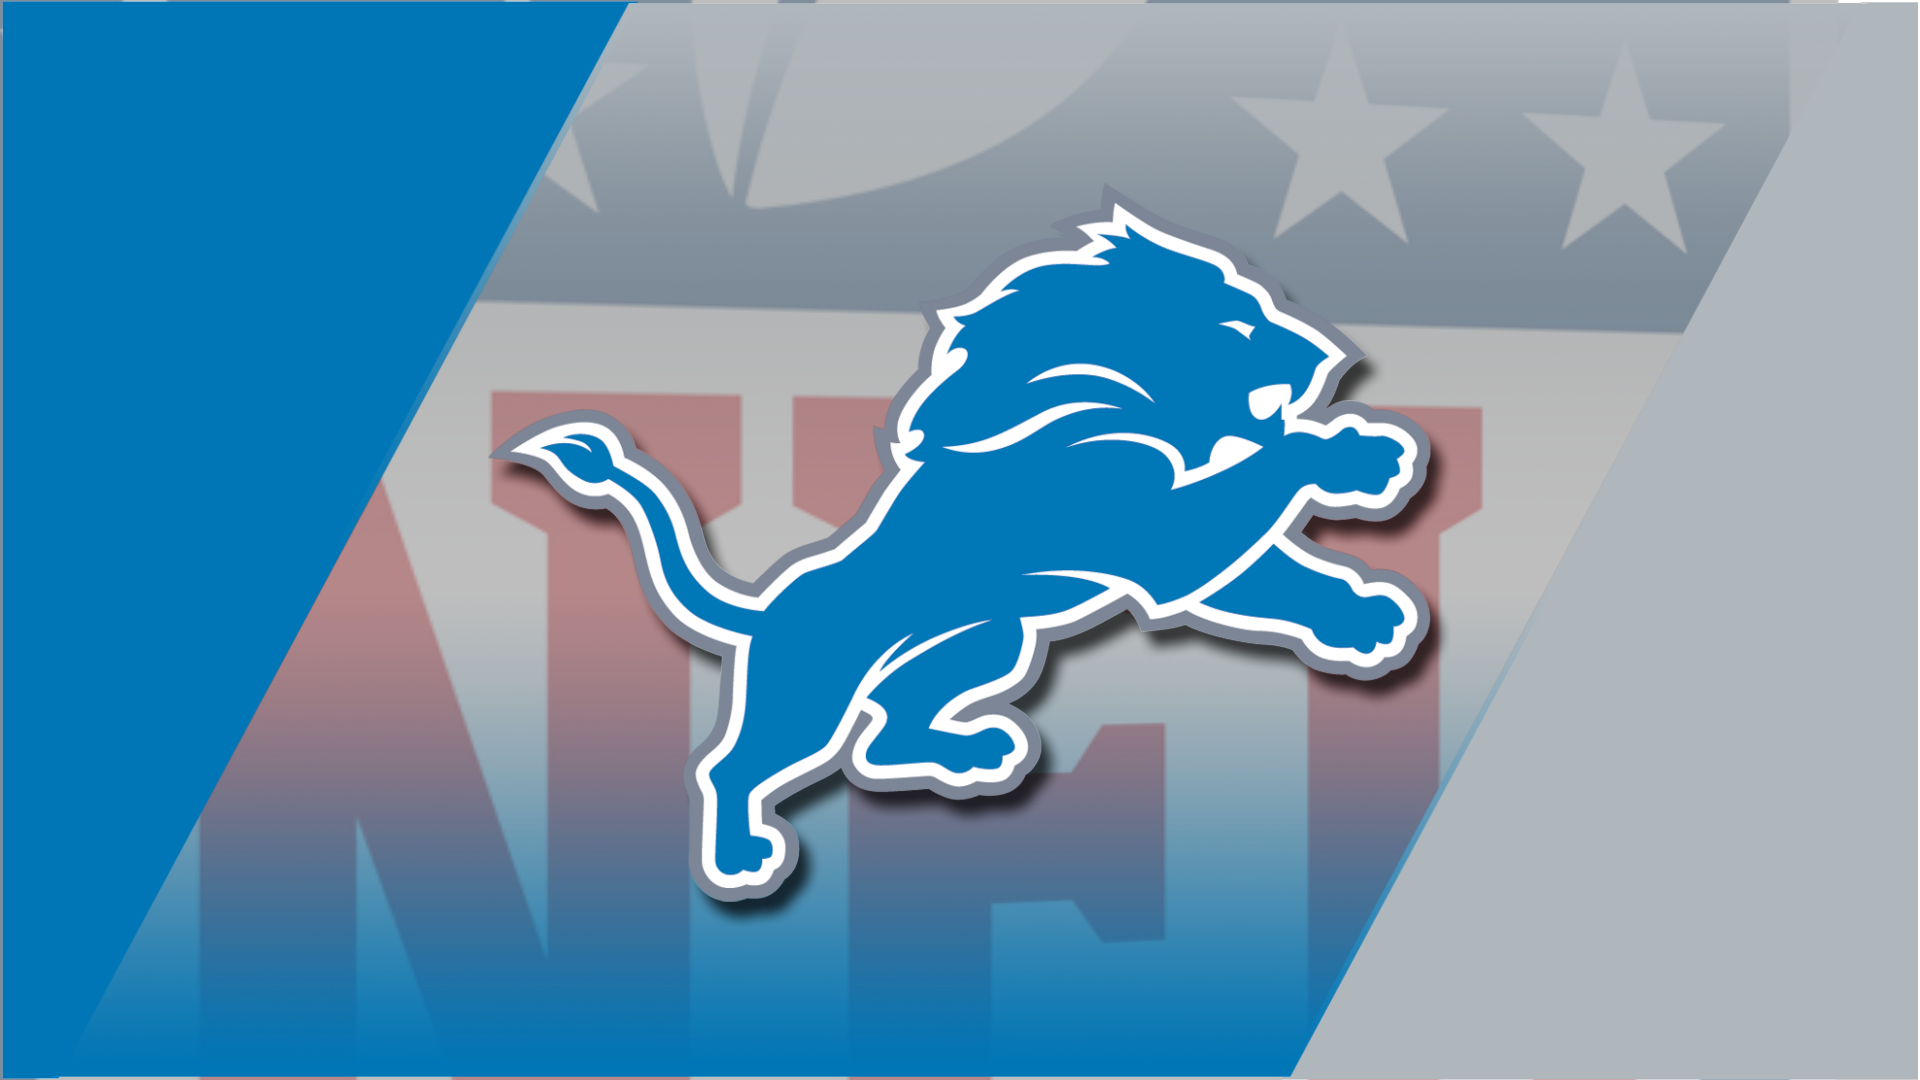 Poll: Who do you think the Lions will draw for their Week 1 matchup?